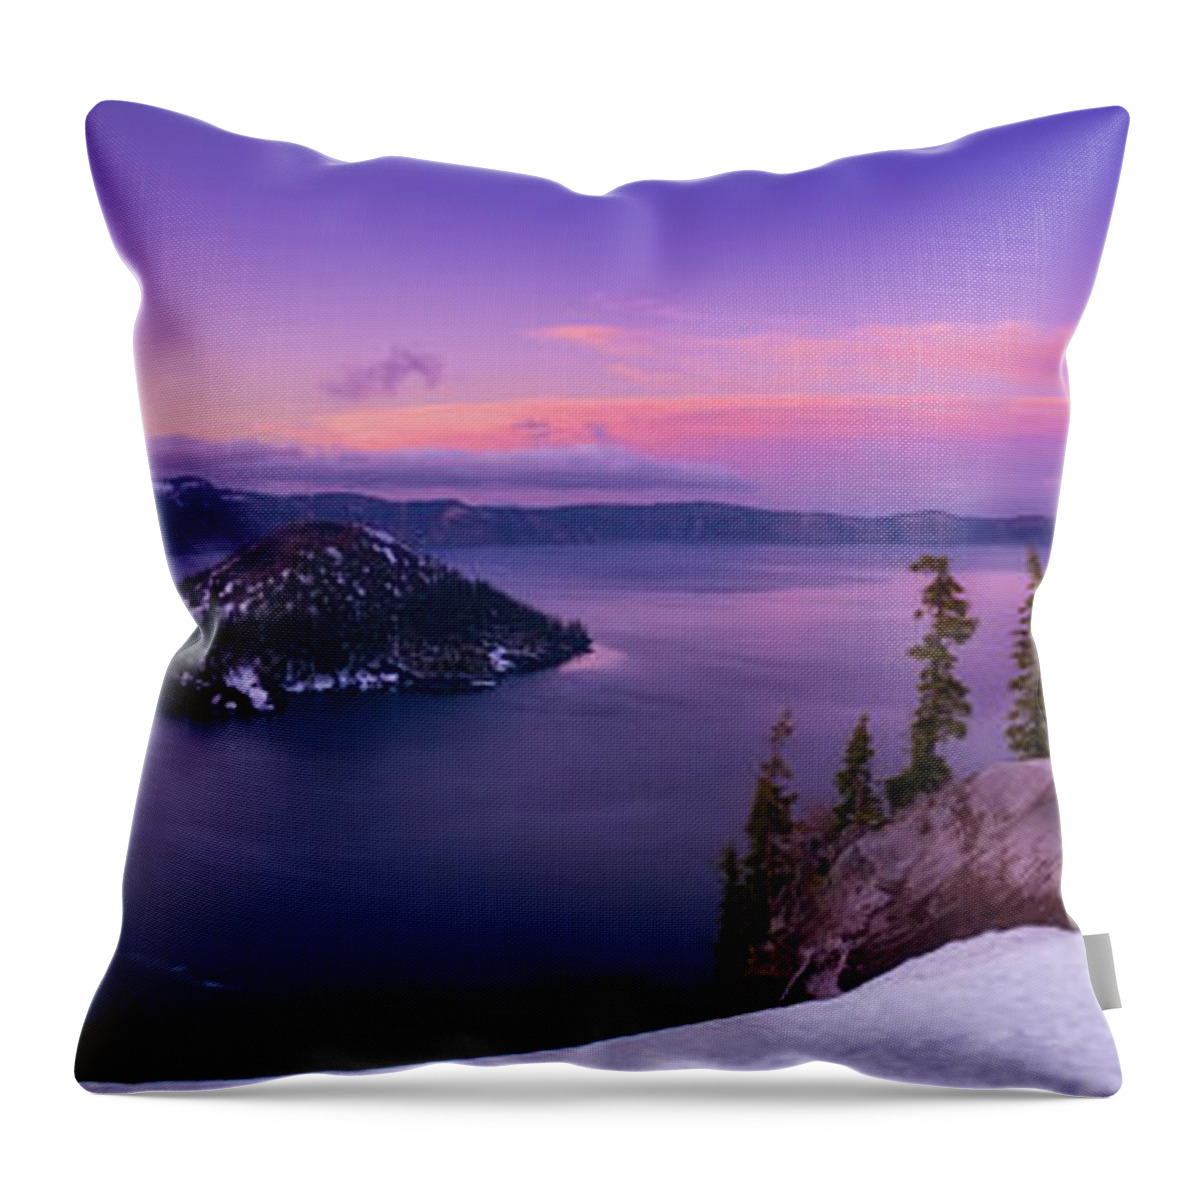 Crater Lake Throw Pillow featuring the photograph Crater Lake Sunset by Darren White Photography